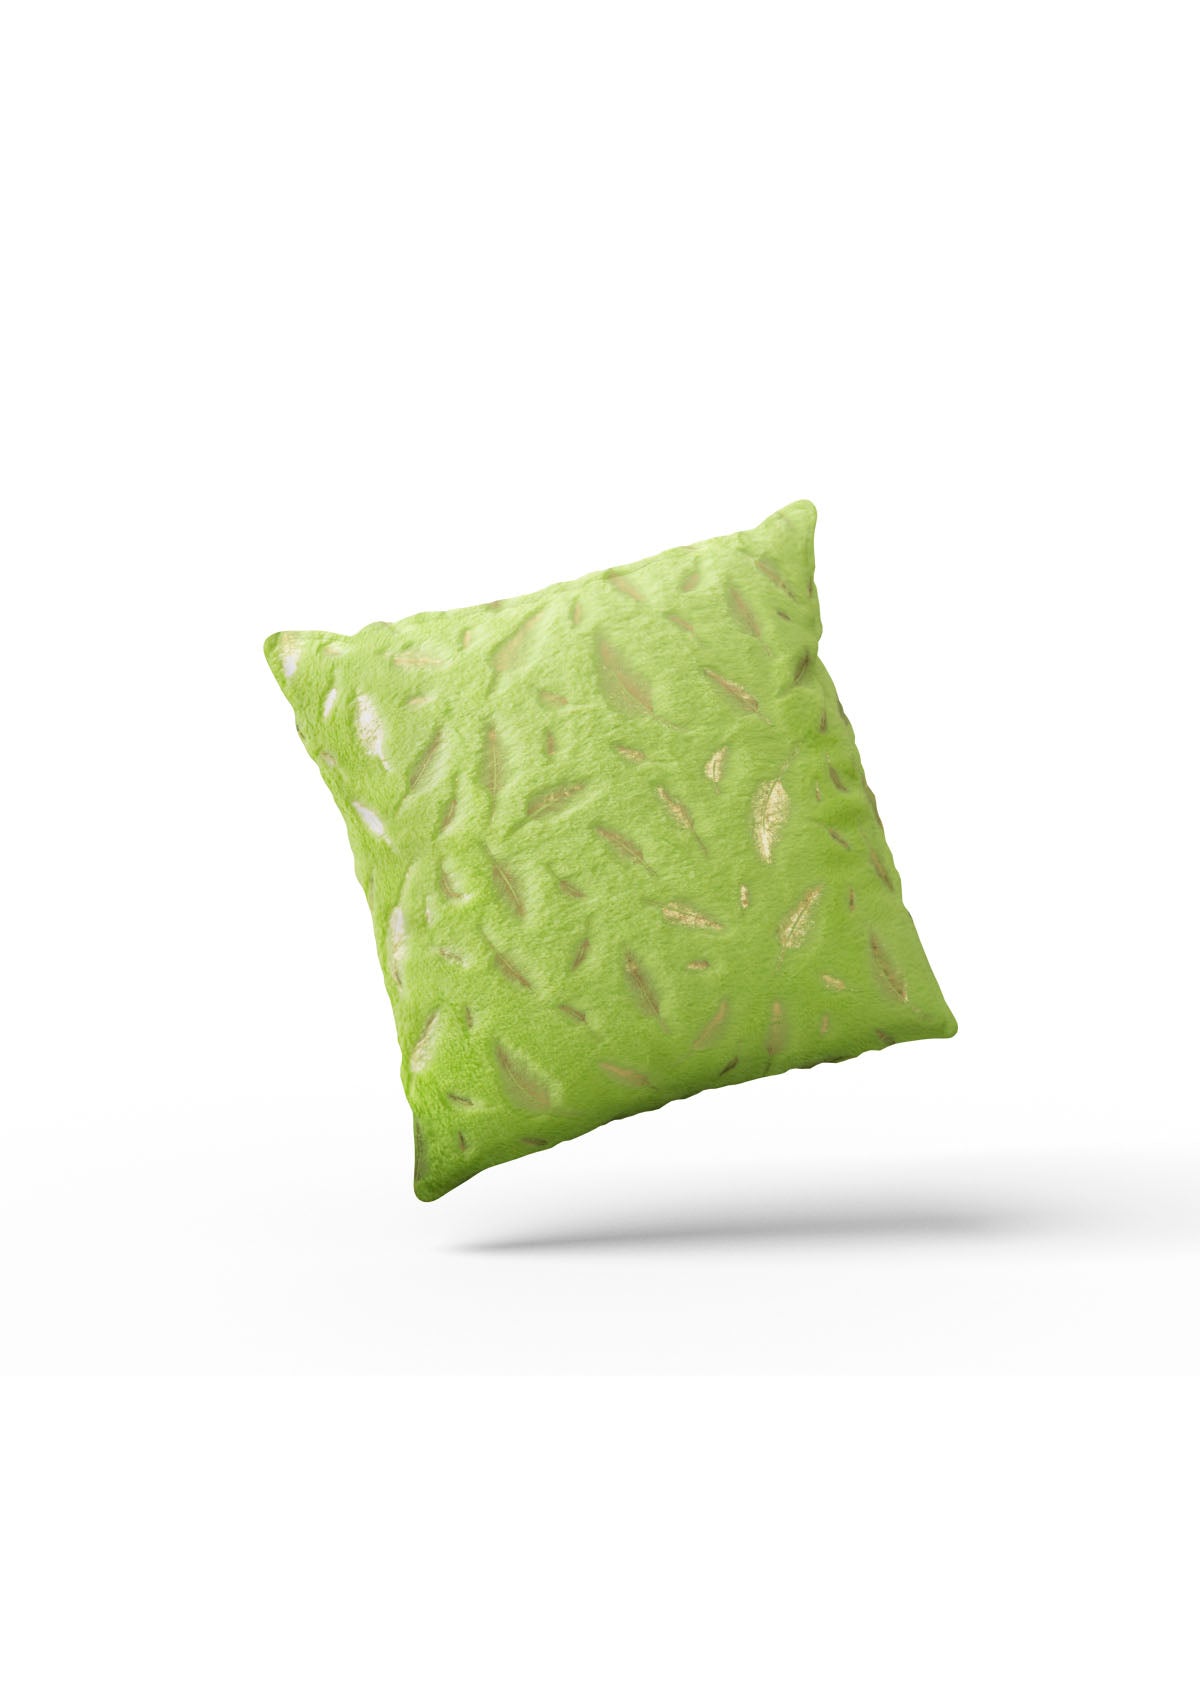 Gold and Green Cushion Covers | CovermyCushion